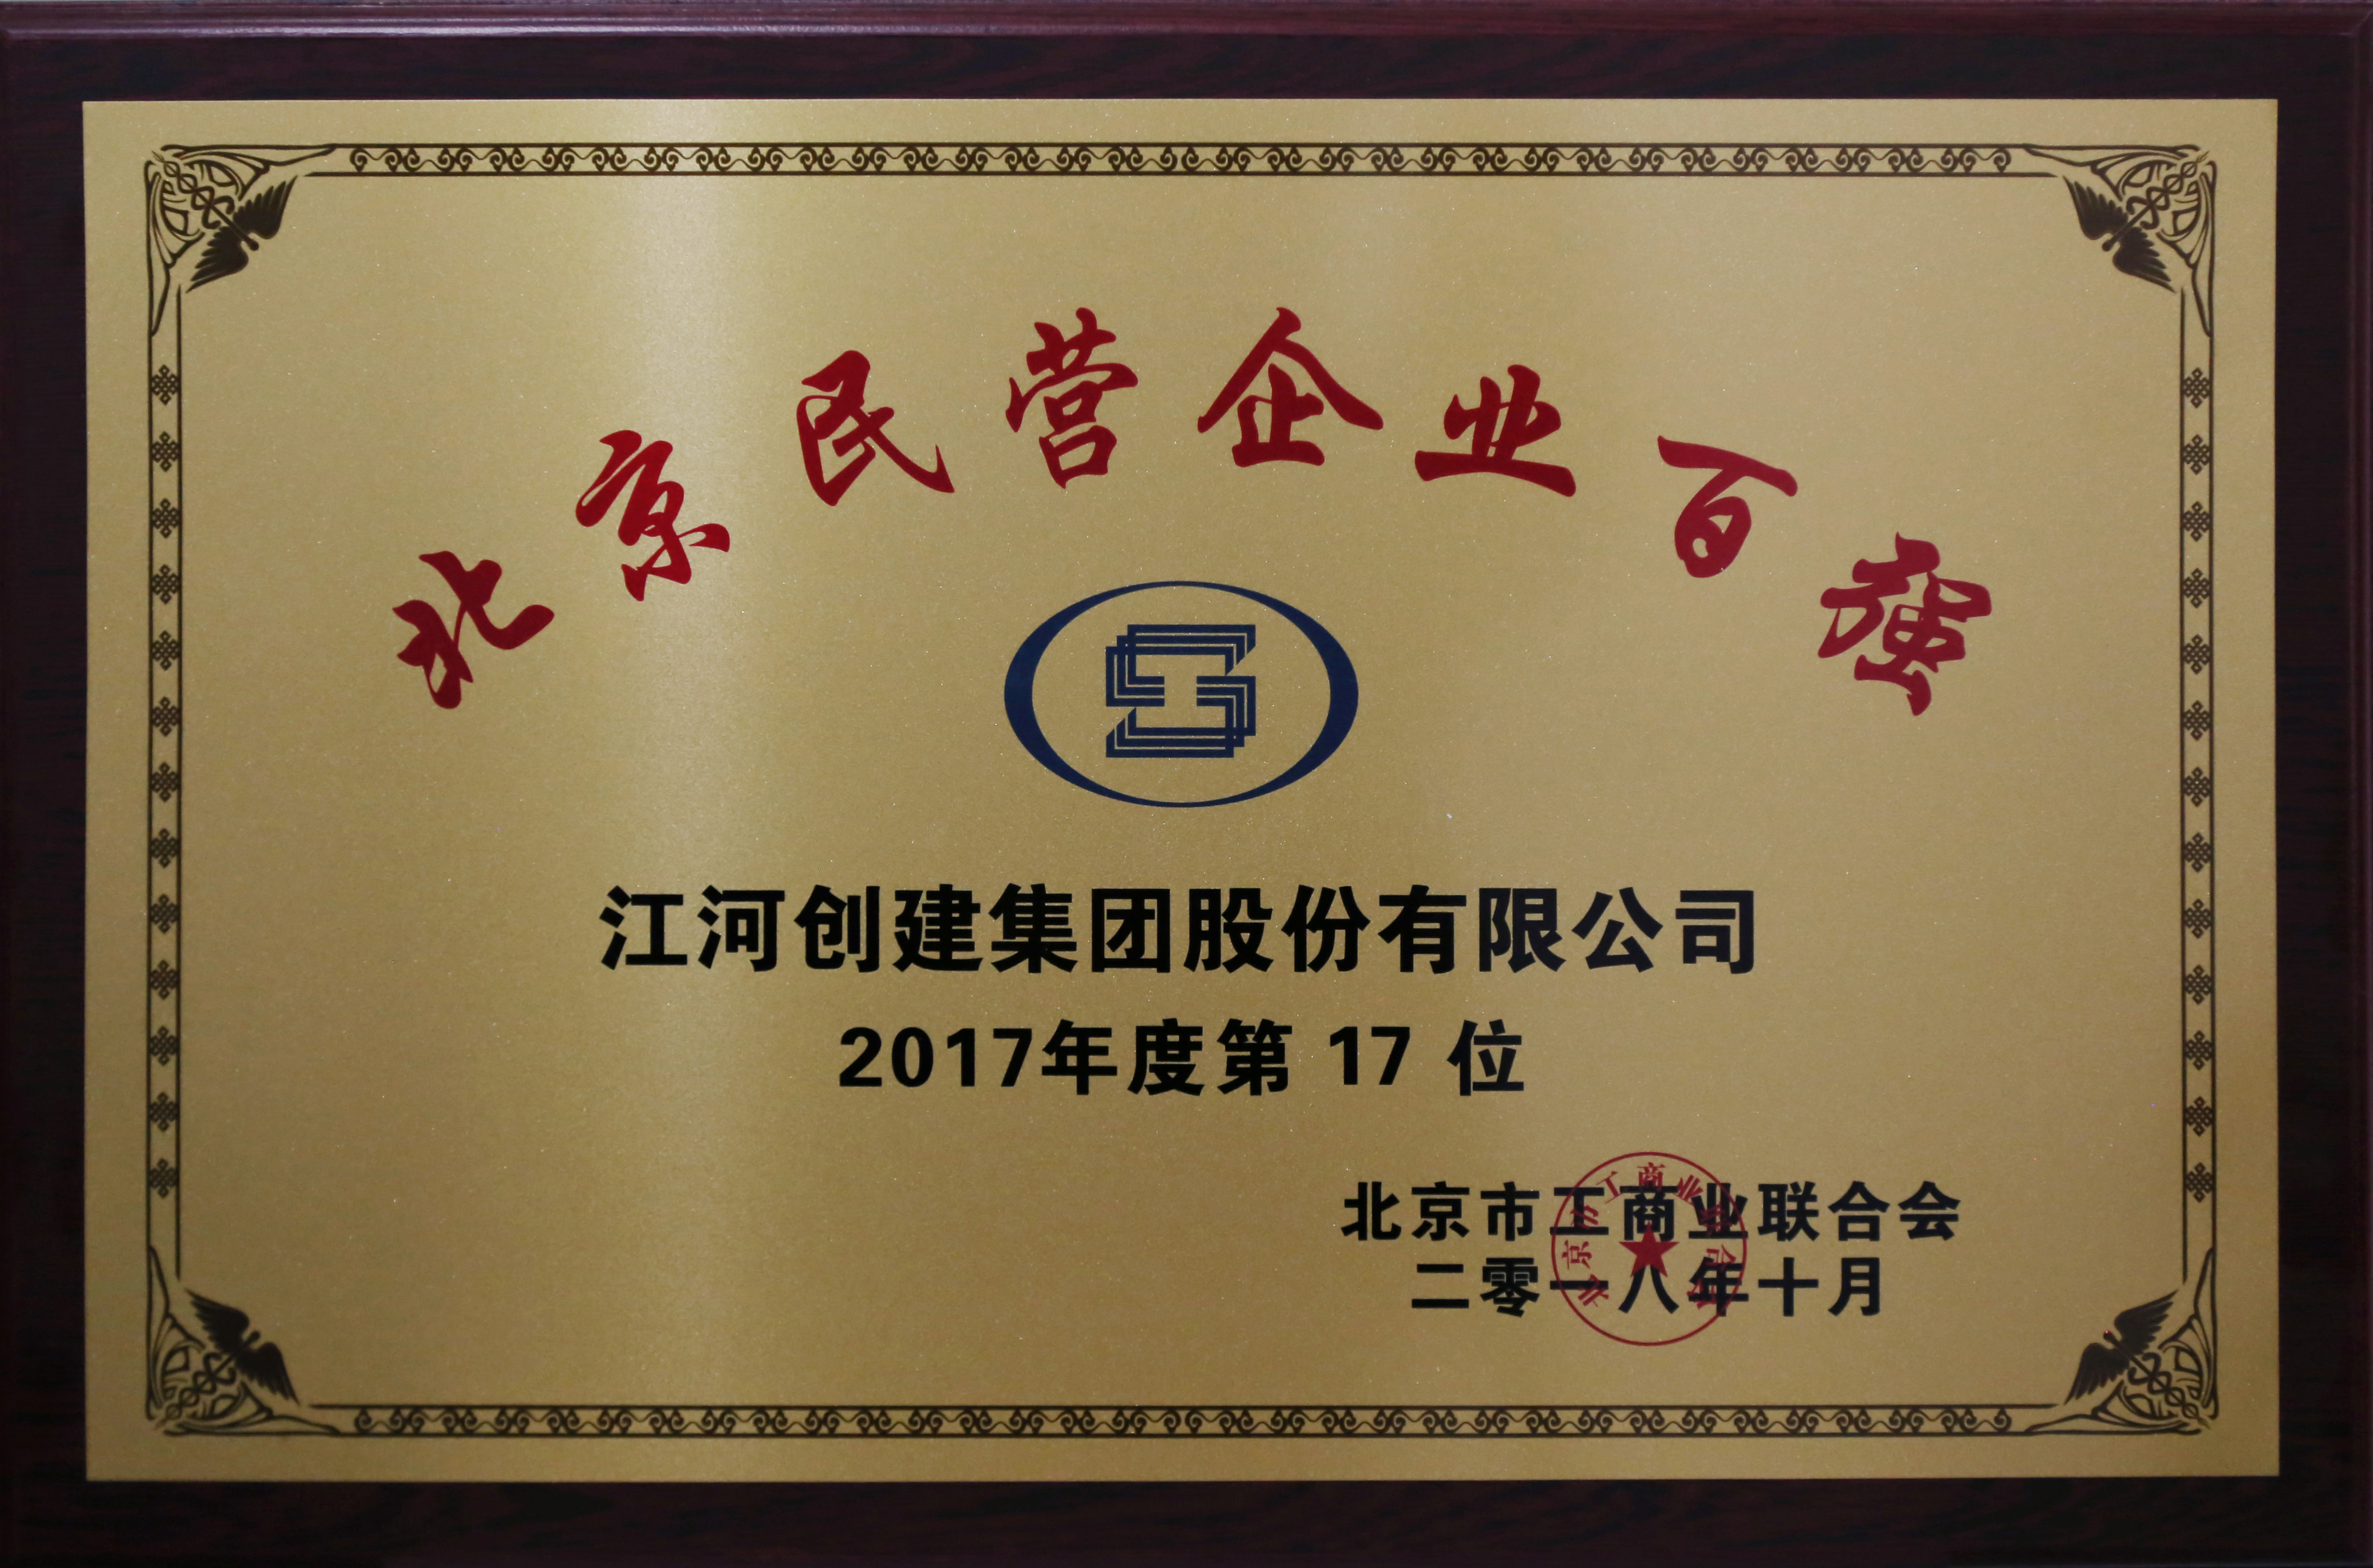 Jangho was Included in “Top 100 Private Enterprises of Beijing” and Took the 3rd Place among “the Top 100 Enterprises with Social Responsibility